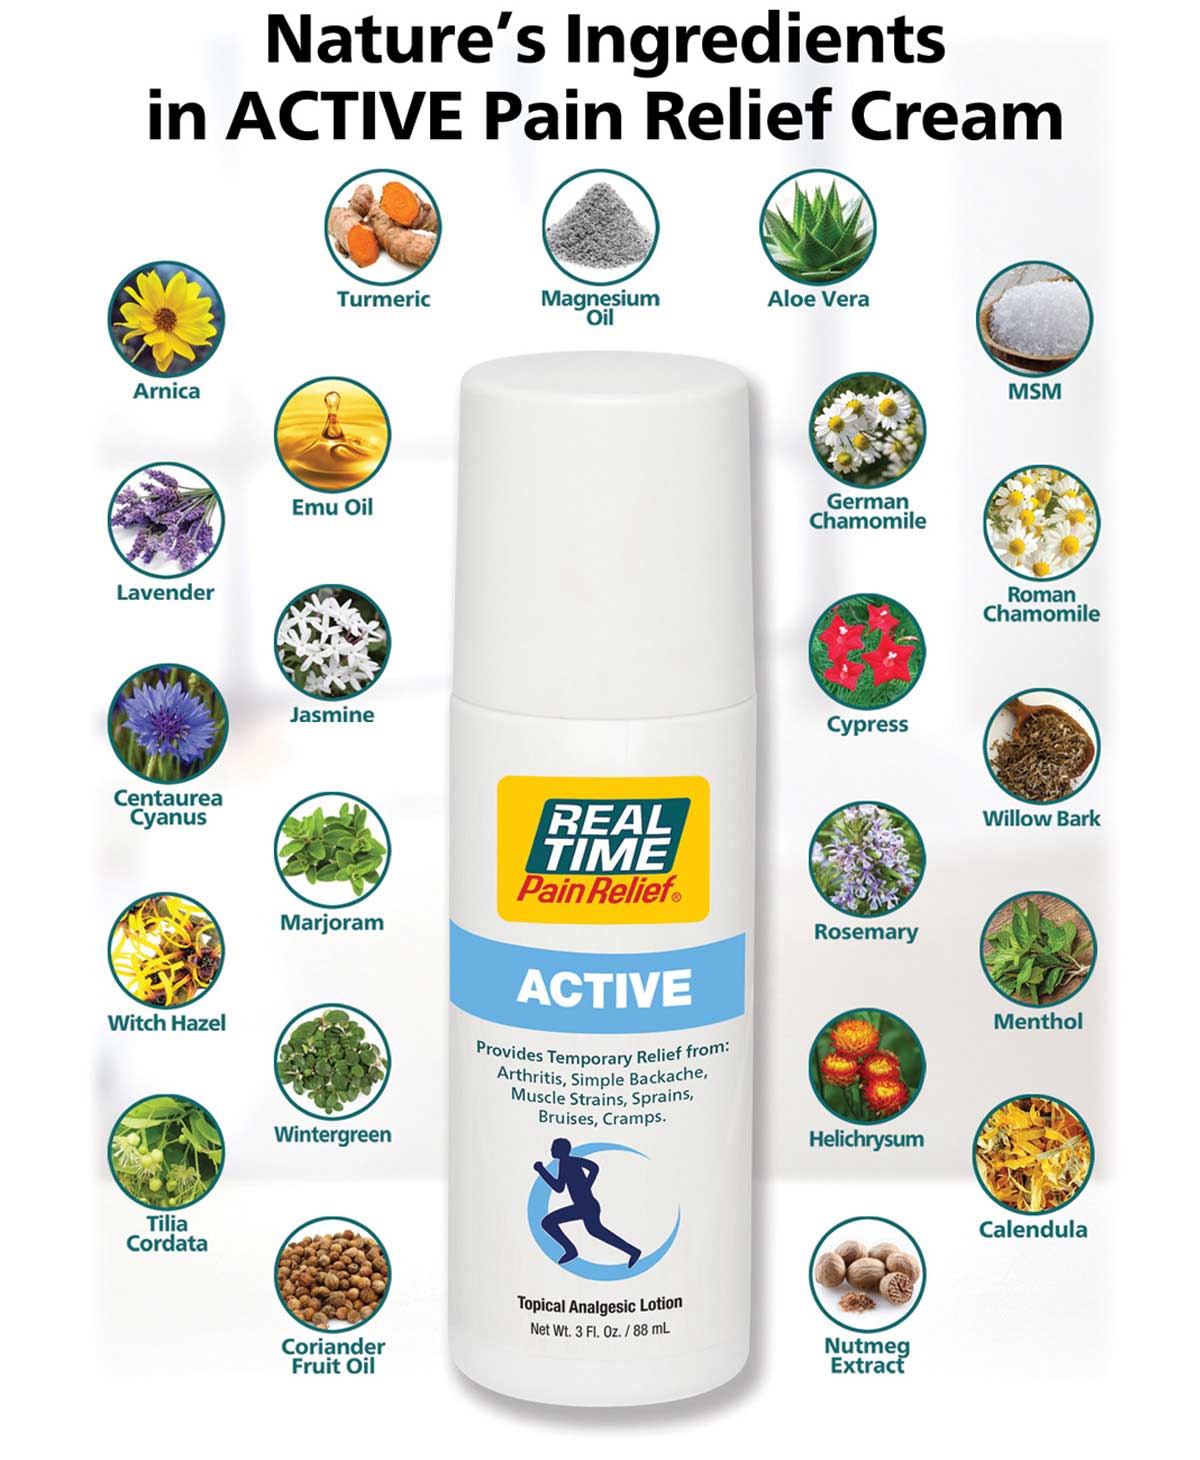 While all <span class='notranslate'>Real Time Pain Relief</span> formulas have rich blends of nature’s ingredients, ACTIVE Pain Relief Cream has a special infusion that compliments the active lifestyle: magnesium, wintergreen oil, helichrysum, turmeric root extract, cypress, marjoram, rosemary, jasmine, lavender and nutmeg.